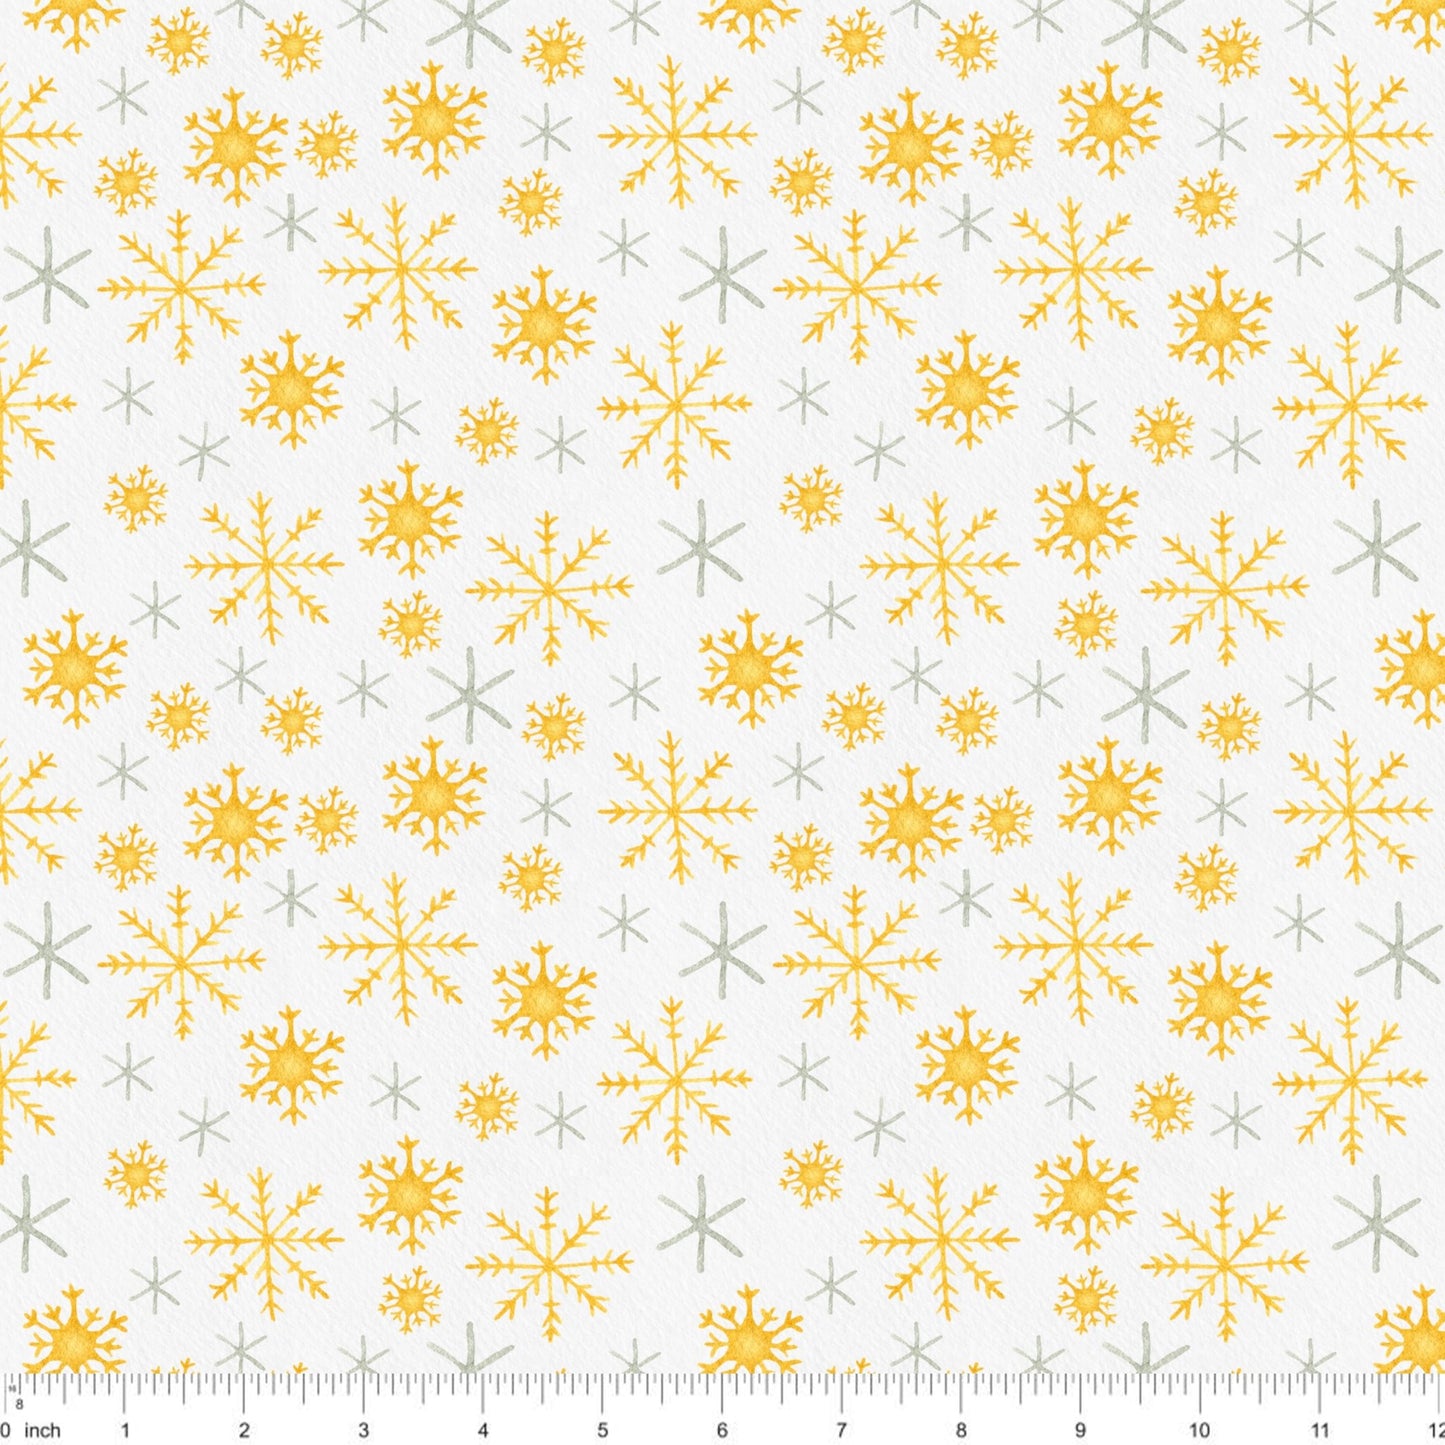 Snowflakes Gold - Light - Winter Owl Coordinate - Little Rhody Sewing Co.